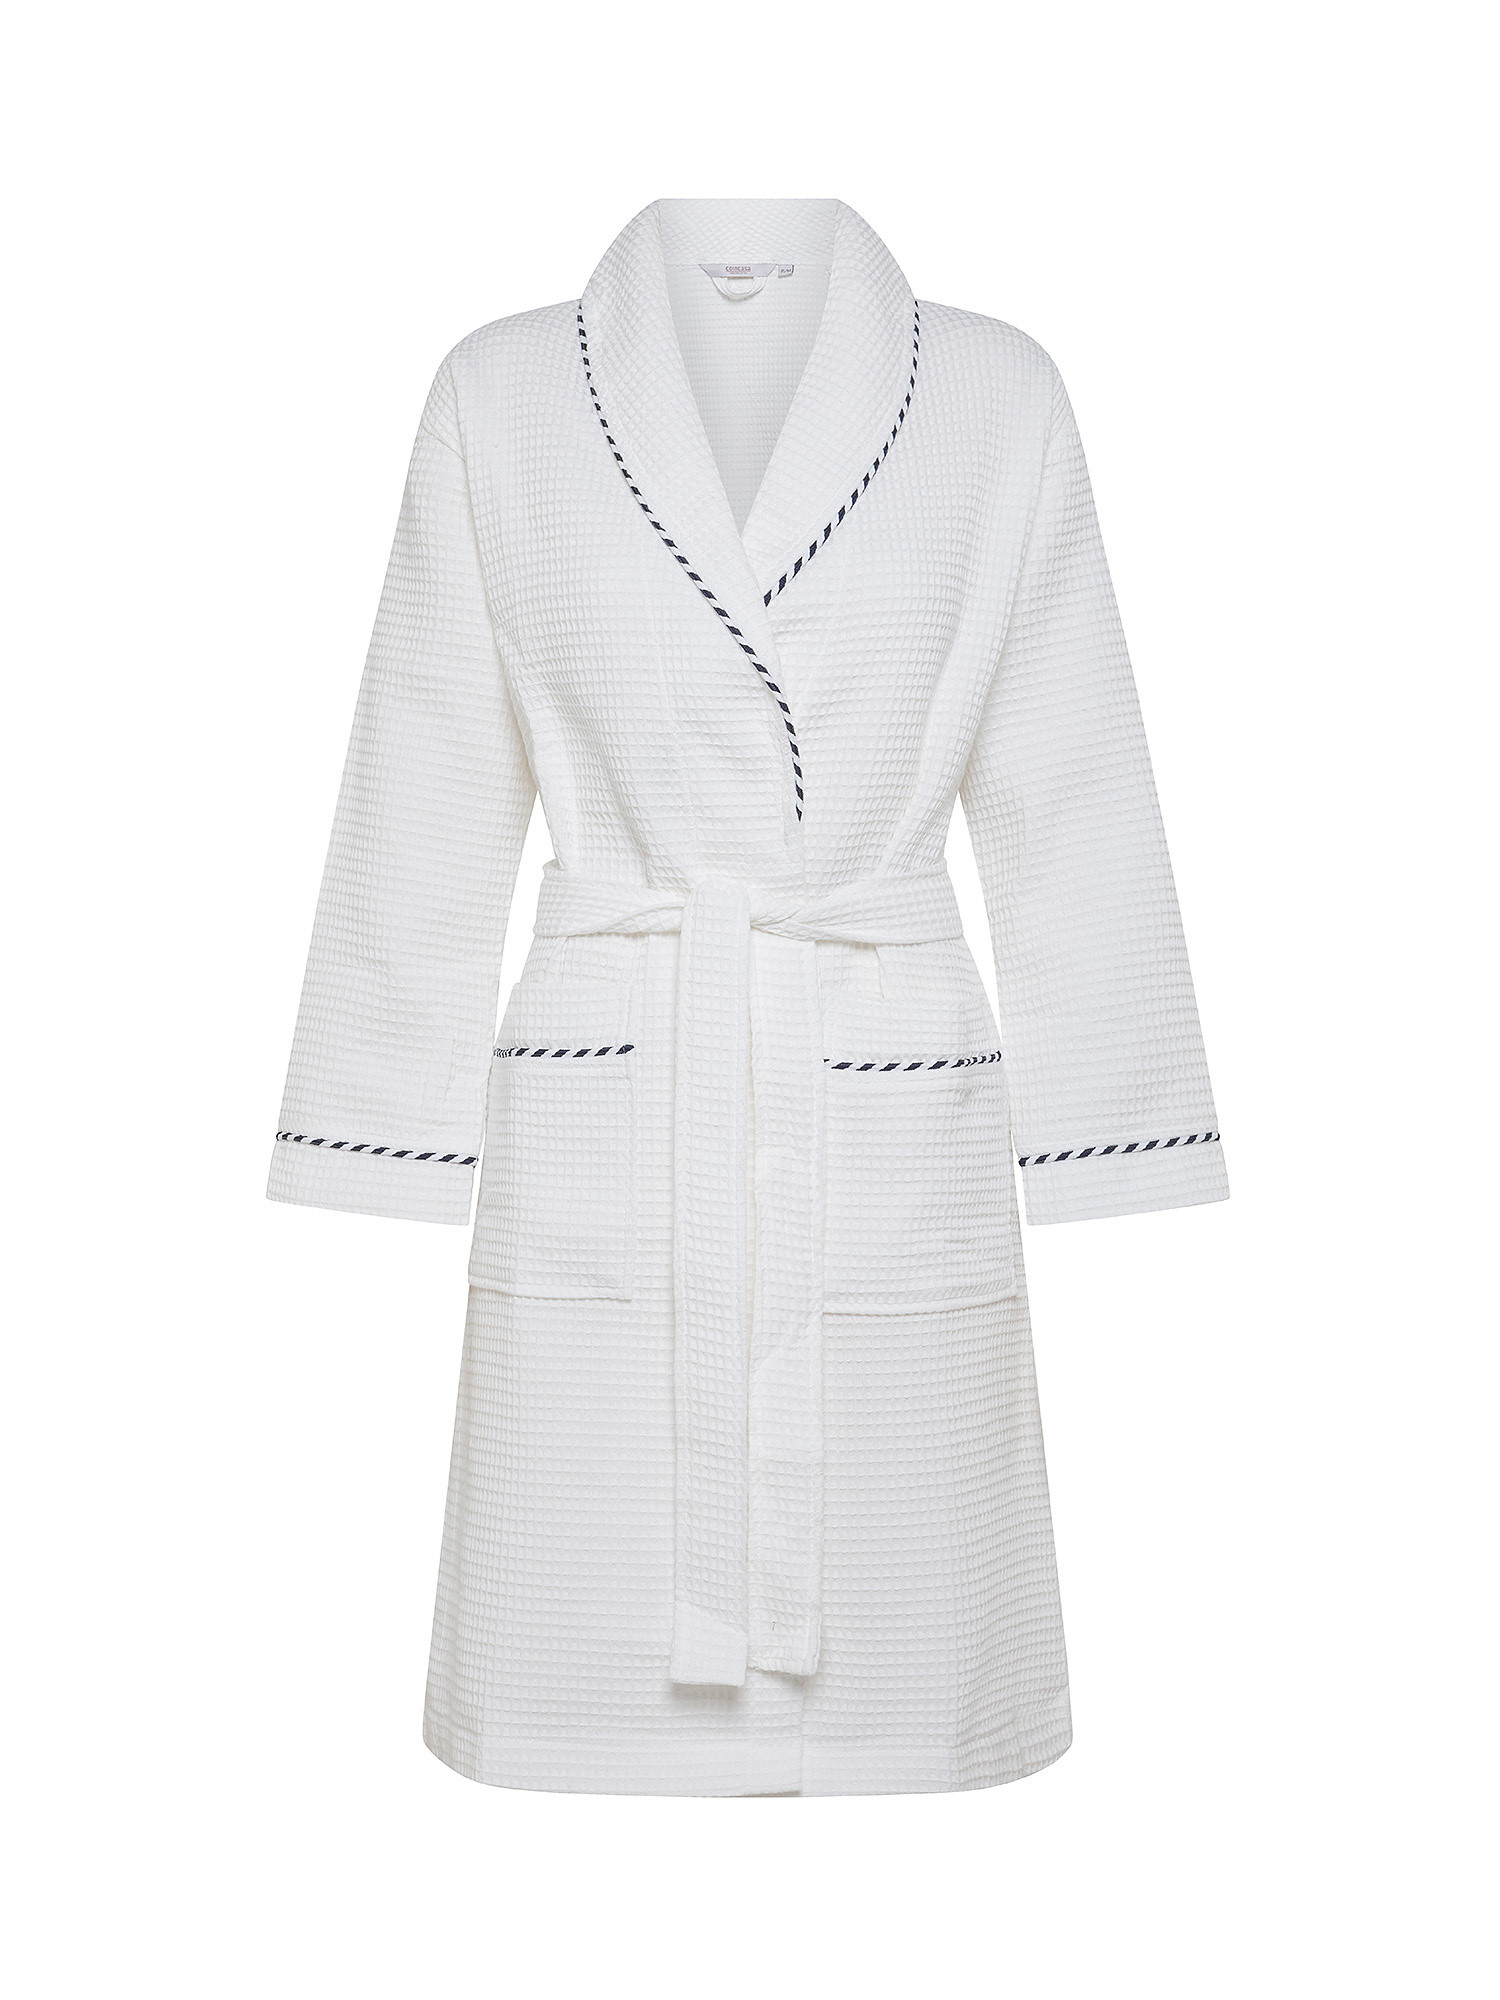 Solid color honeycomb cotton bathrobe, White, large image number 0